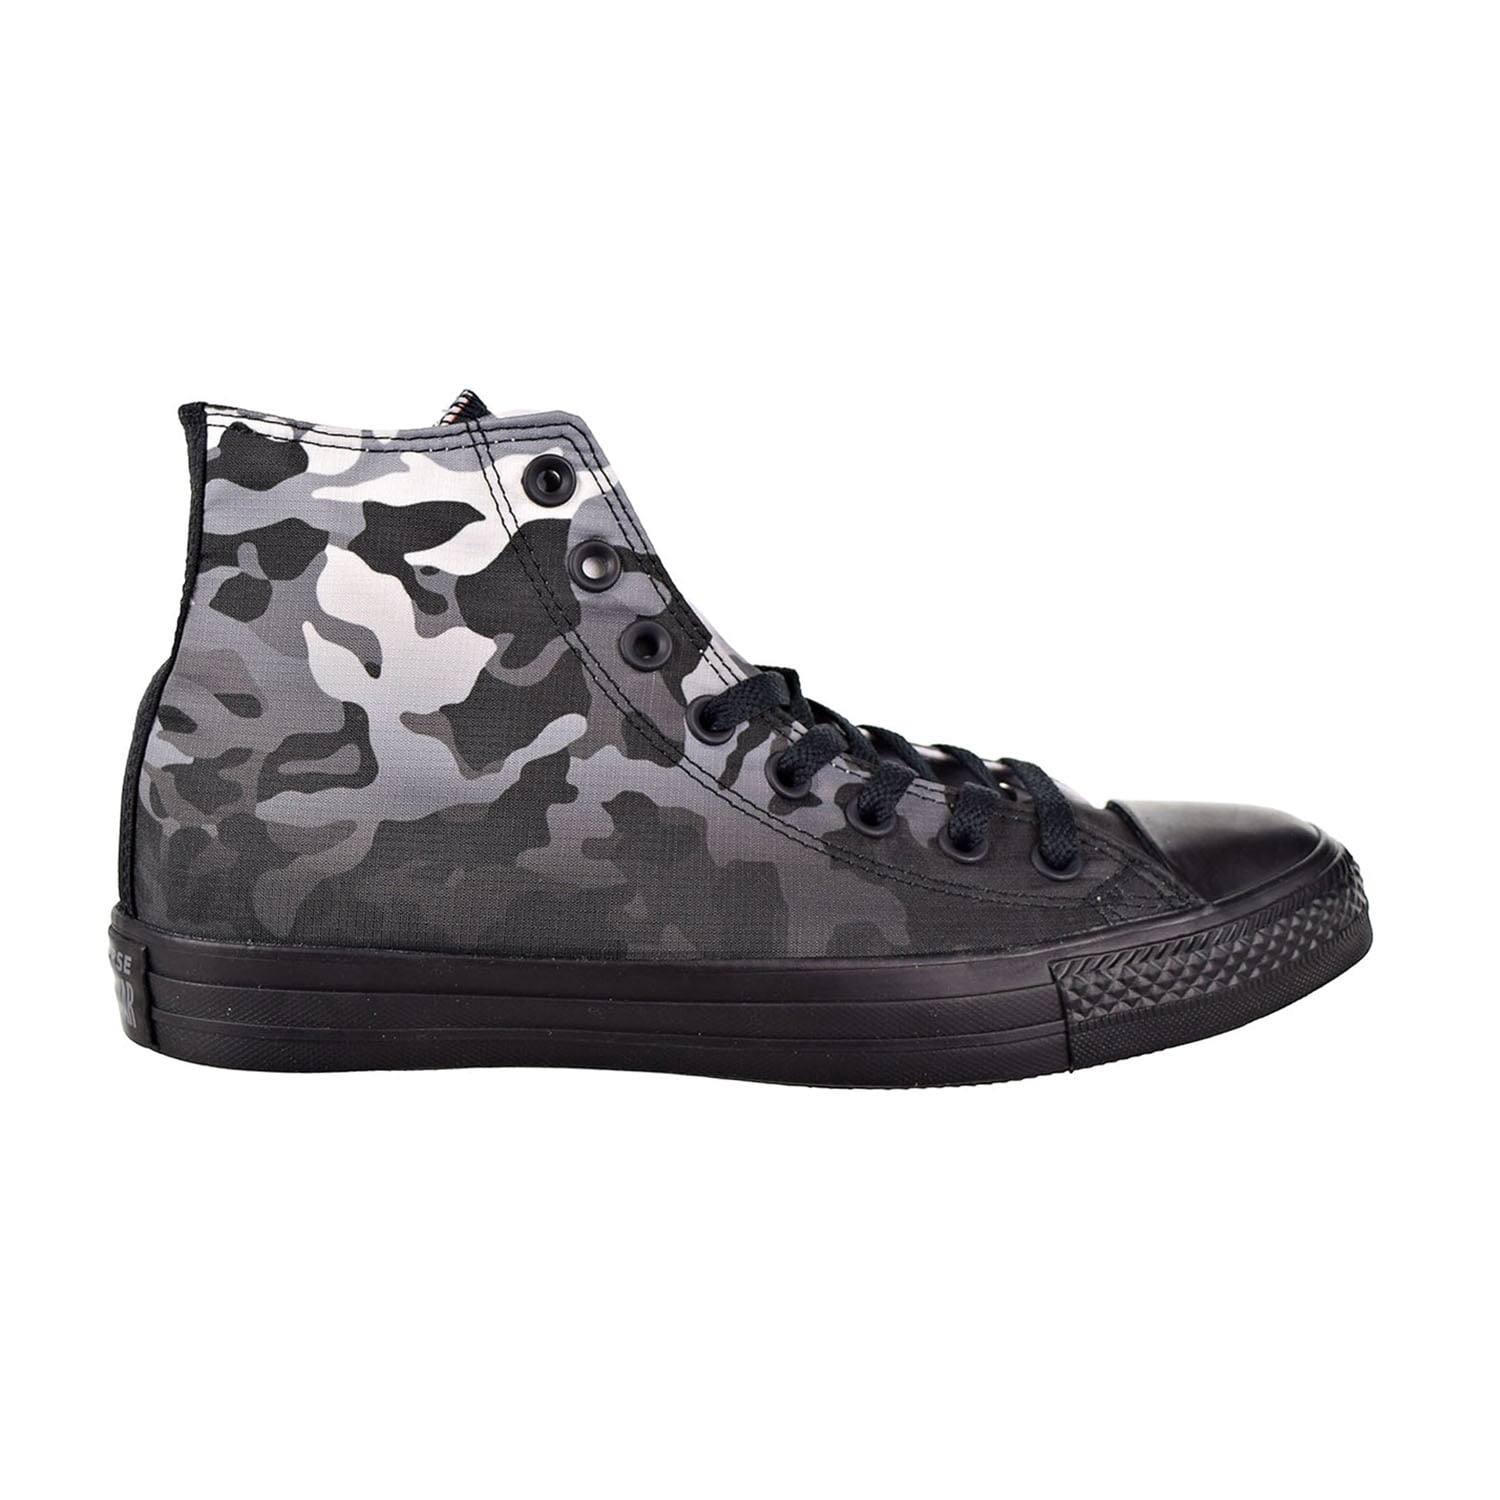 Sneakers scarpe All Star Converse camouflage basse | Vinted